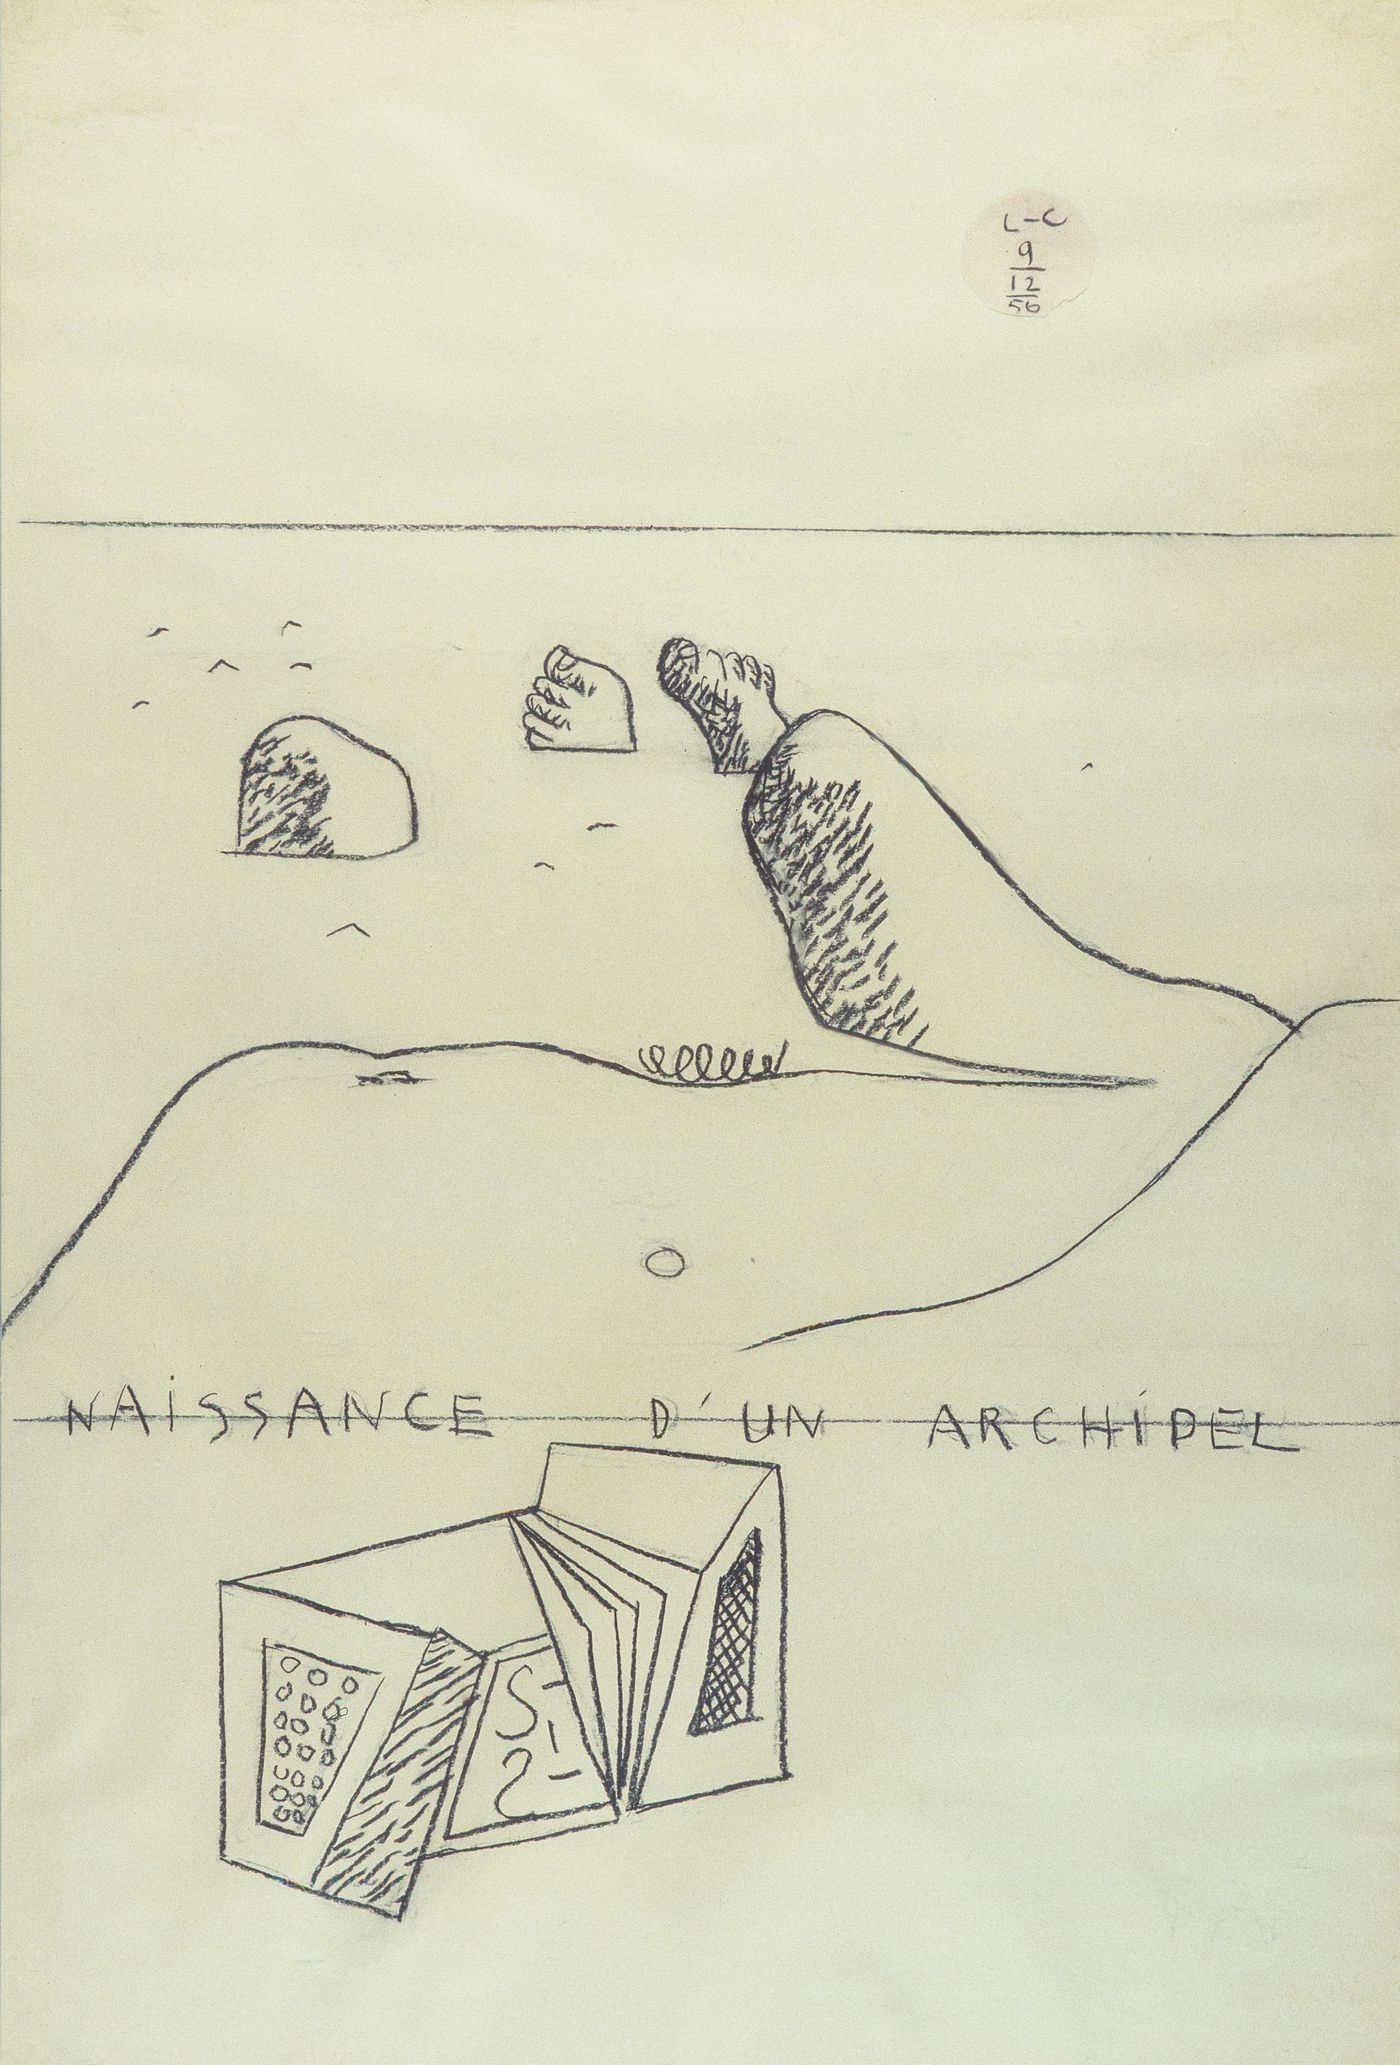 Photograph of a drawings by Le Corbusier